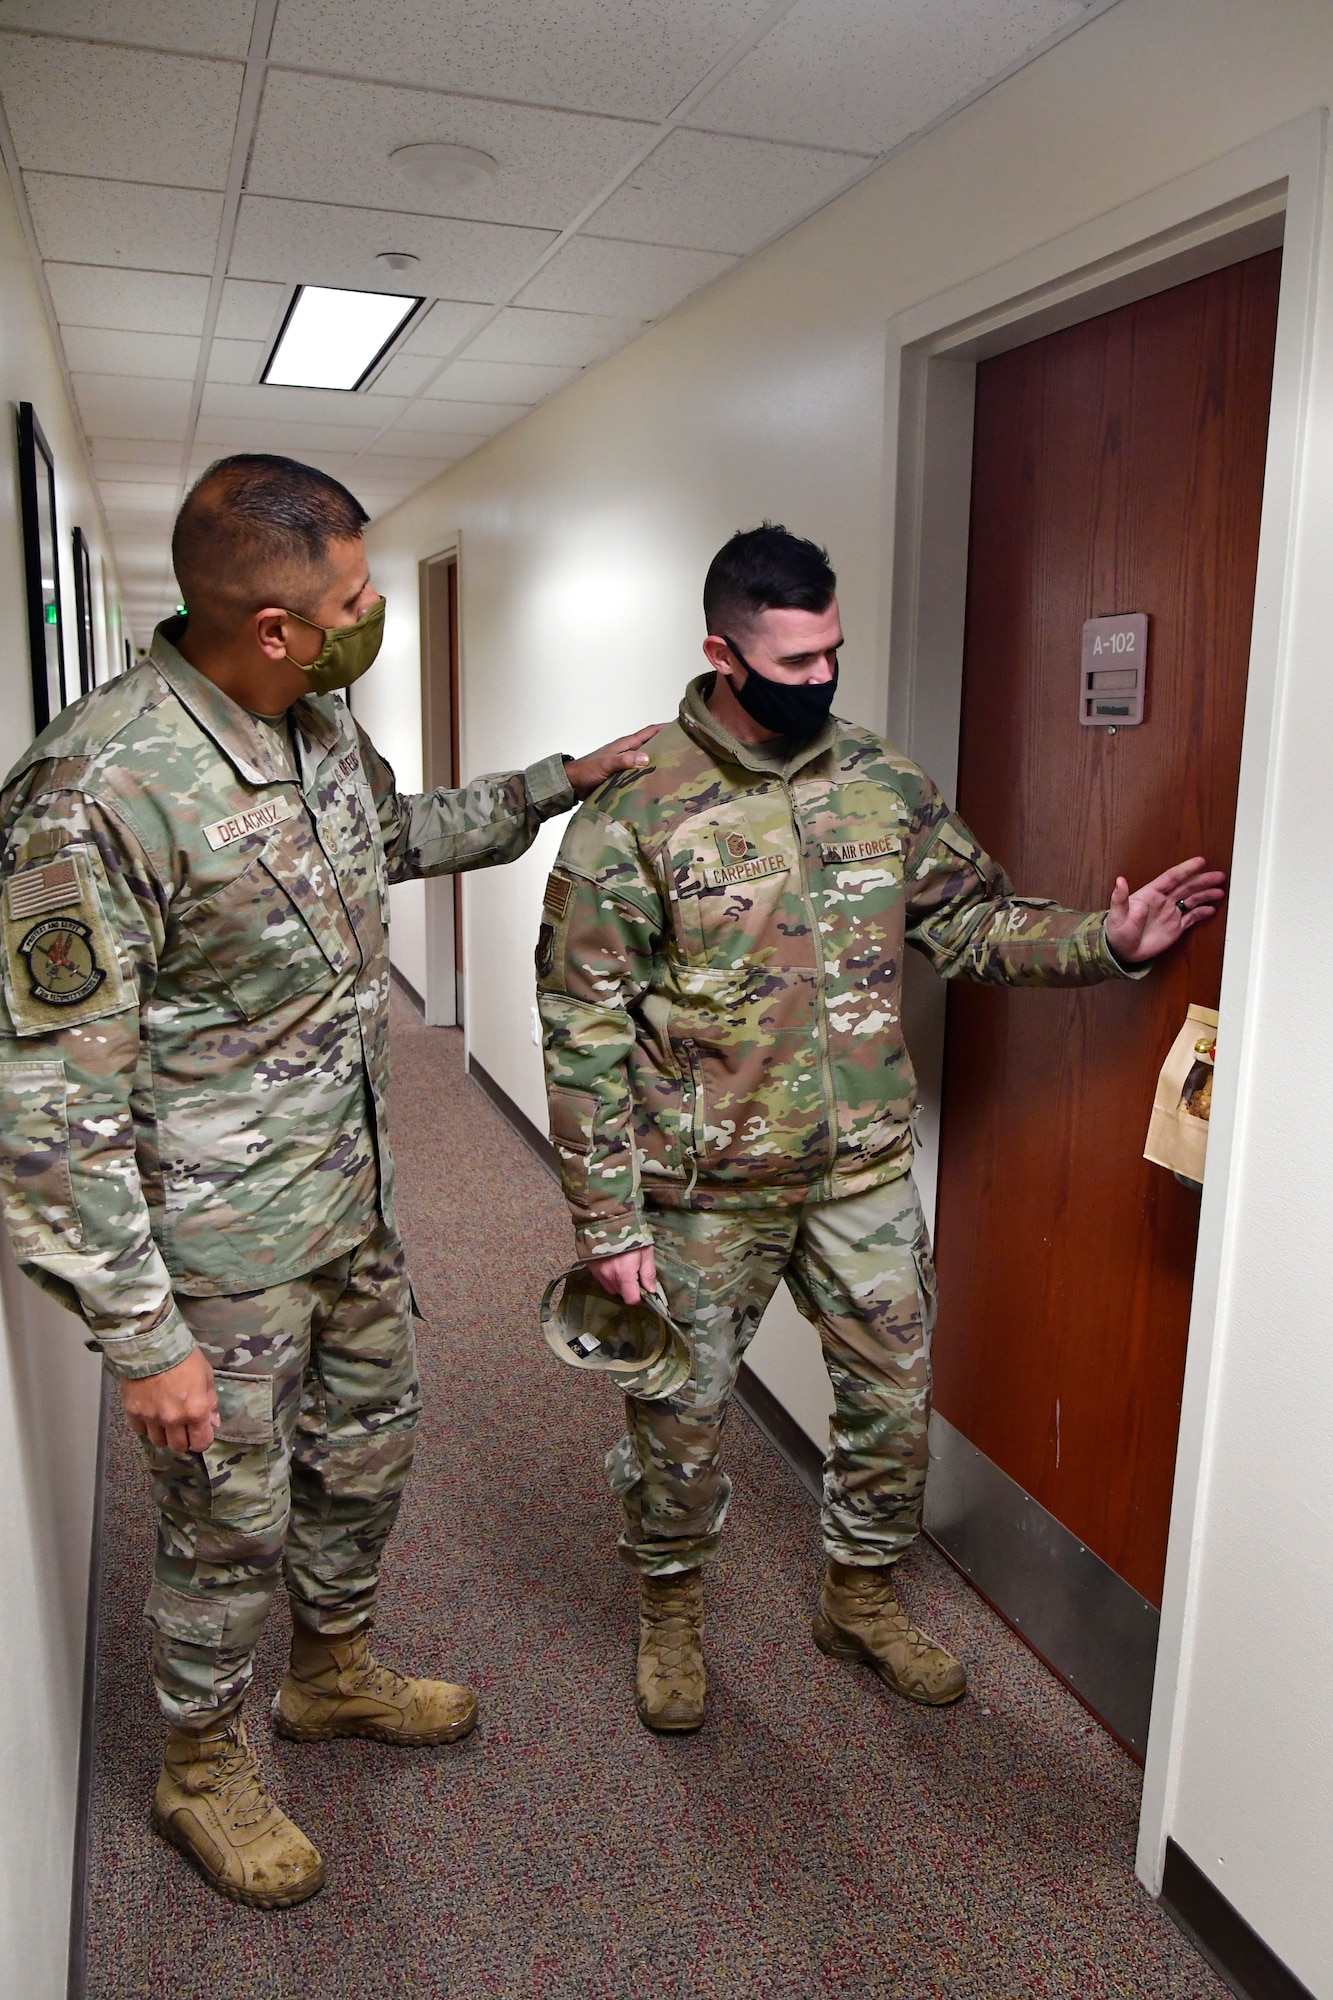 First sergeants deliver cookies at the dorm